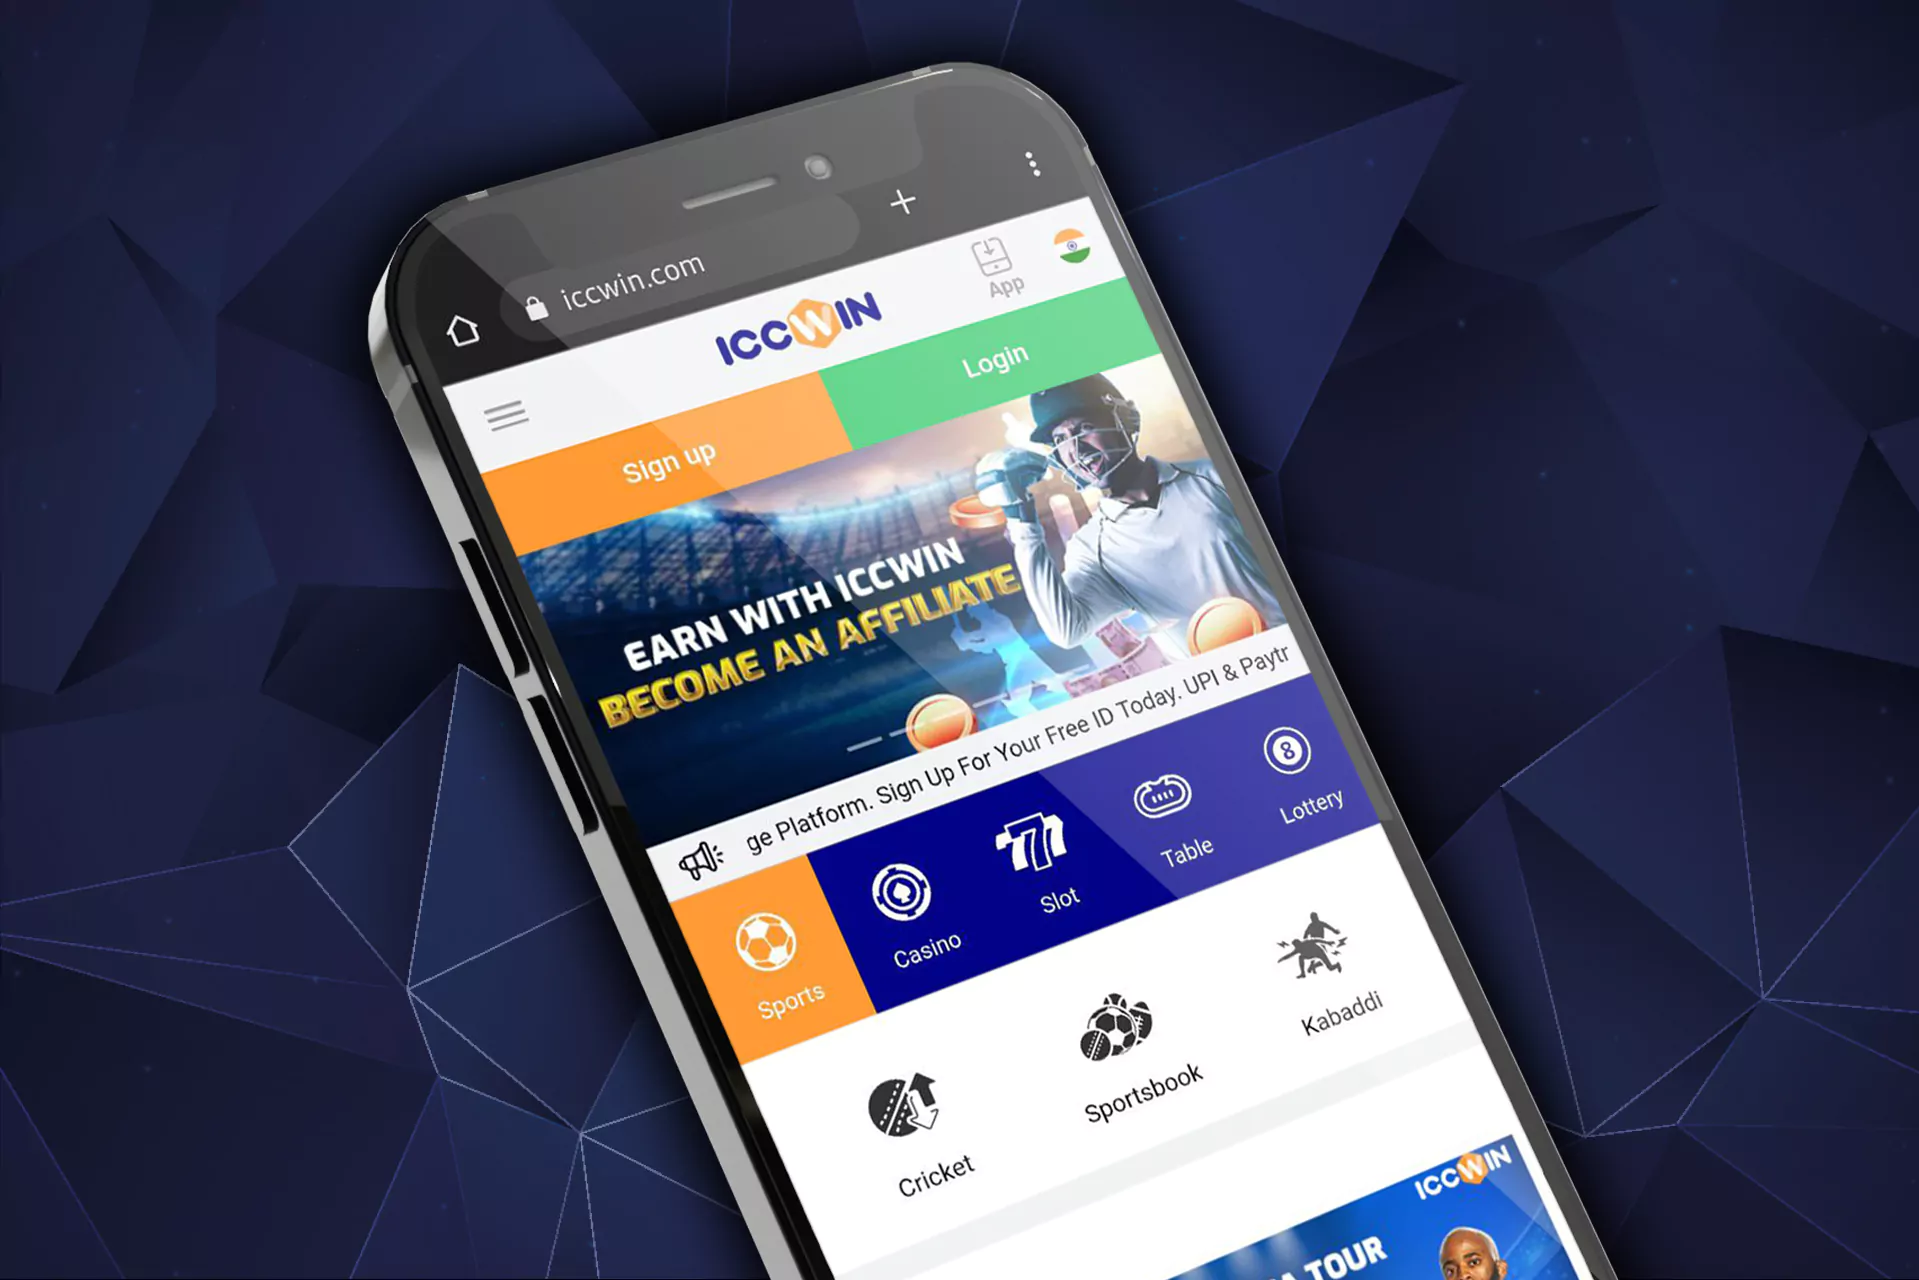 You can get access to ICCWIN via your mobile phone without downloading the app.